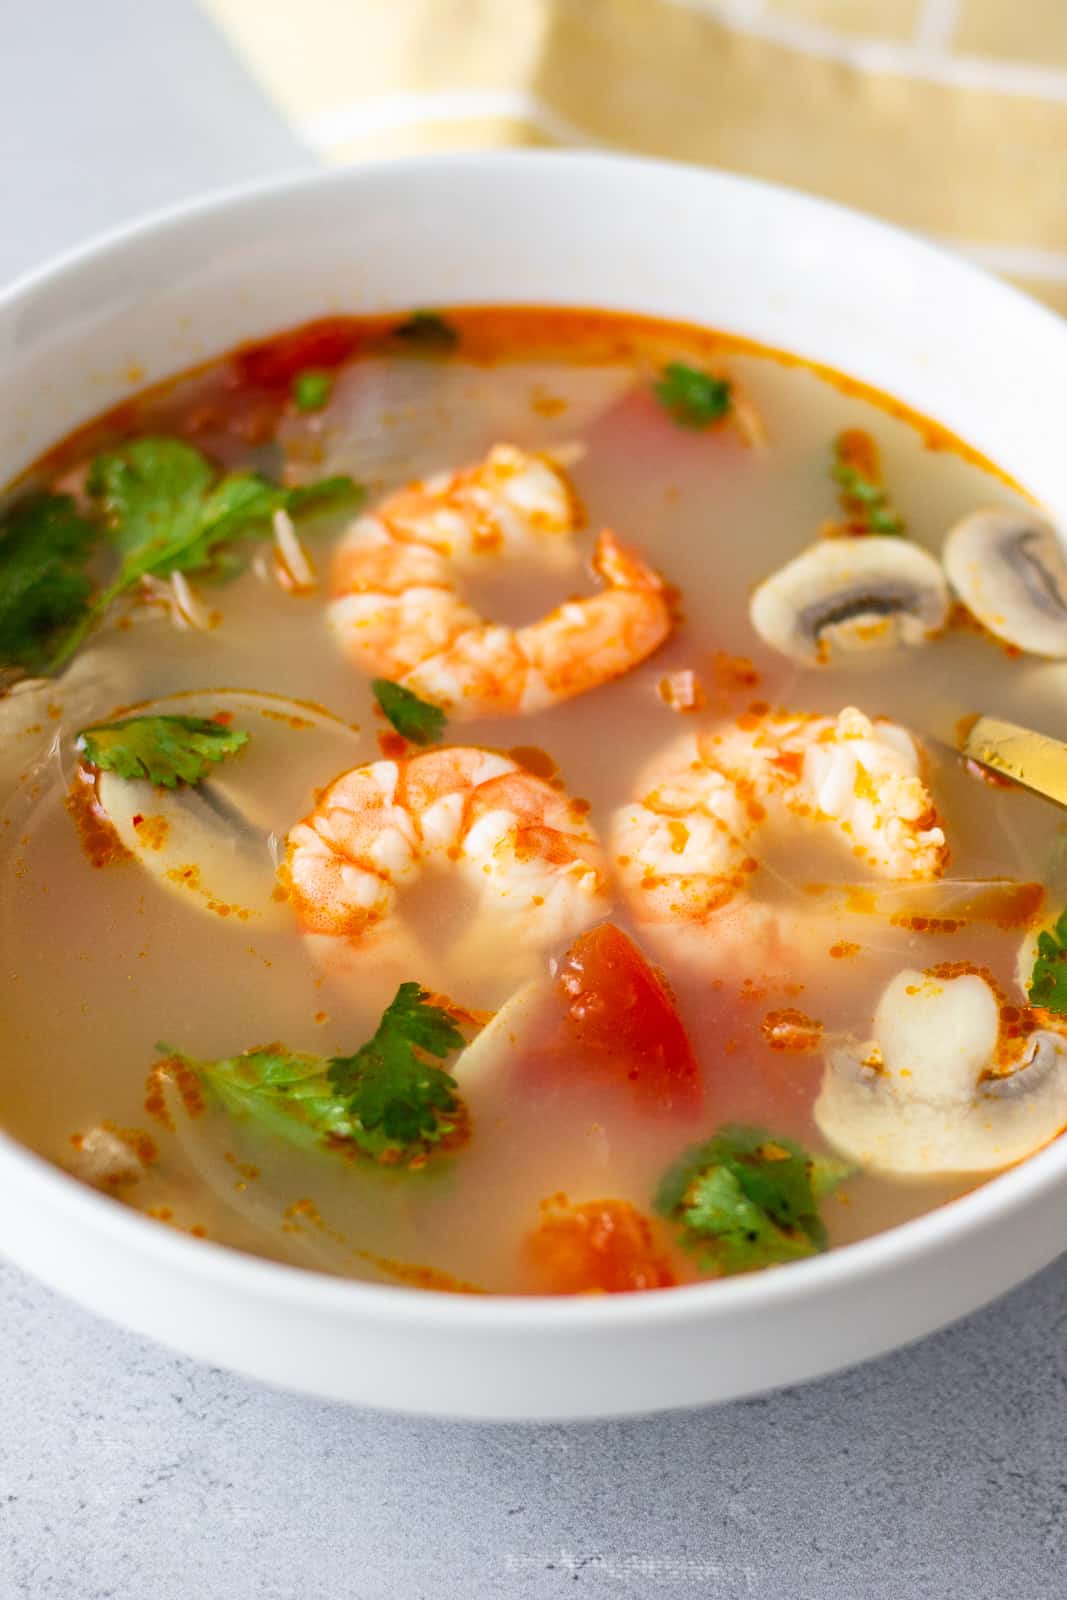 Shrimp soup in a white bowl garnished with cilantro.